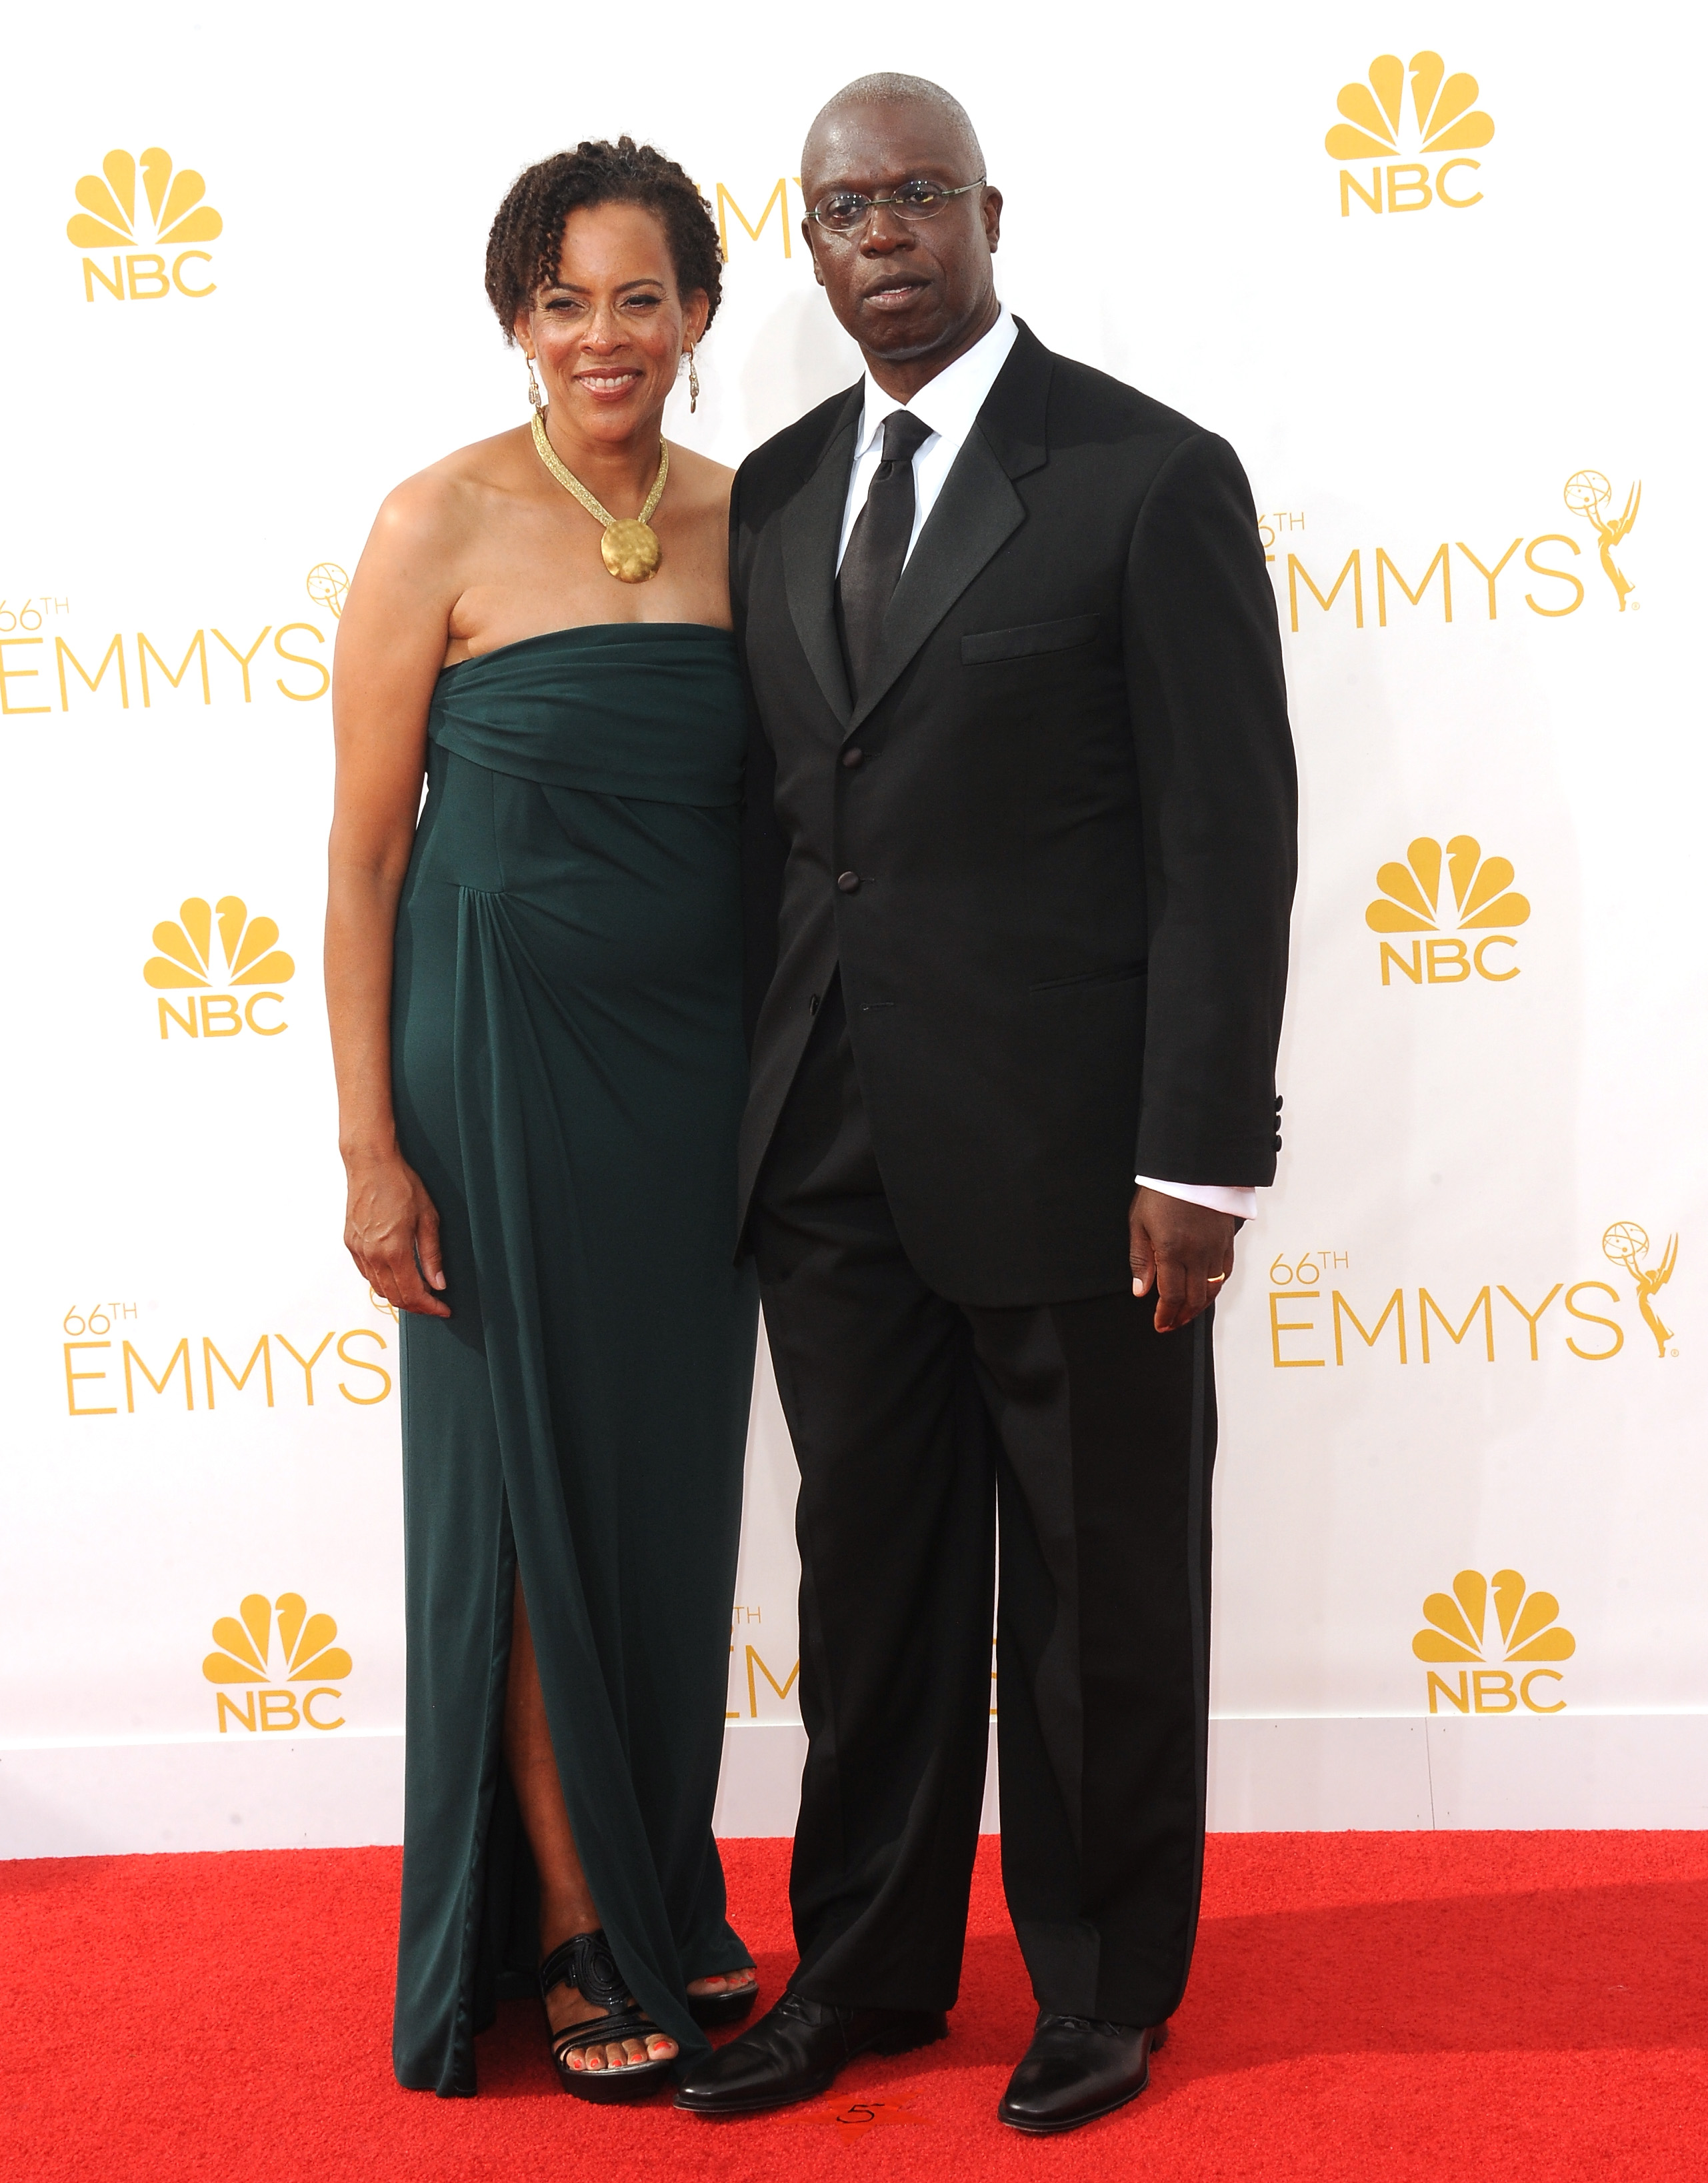 Ami Brabson and Andre Braugher at the 66th Annual Primetime Emmy Awards in Los Angeles, California on August 25, 2014 | Source: Getty Images